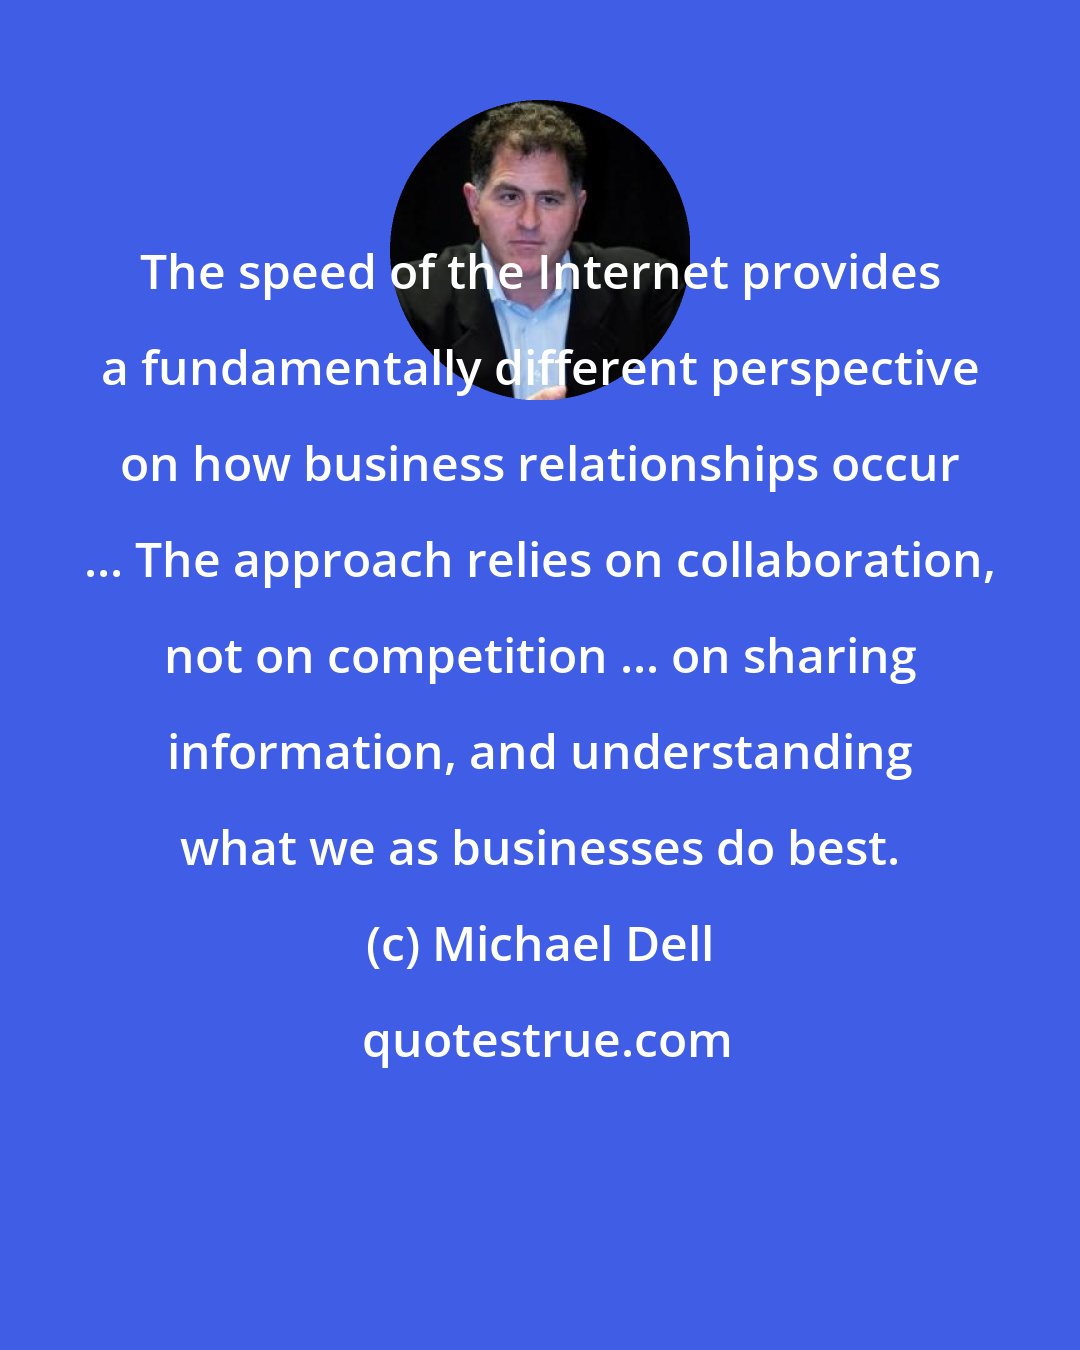 Michael Dell: The speed of the Internet provides a fundamentally different perspective on how business relationships occur ... The approach relies on collaboration, not on competition ... on sharing information, and understanding what we as businesses do best.